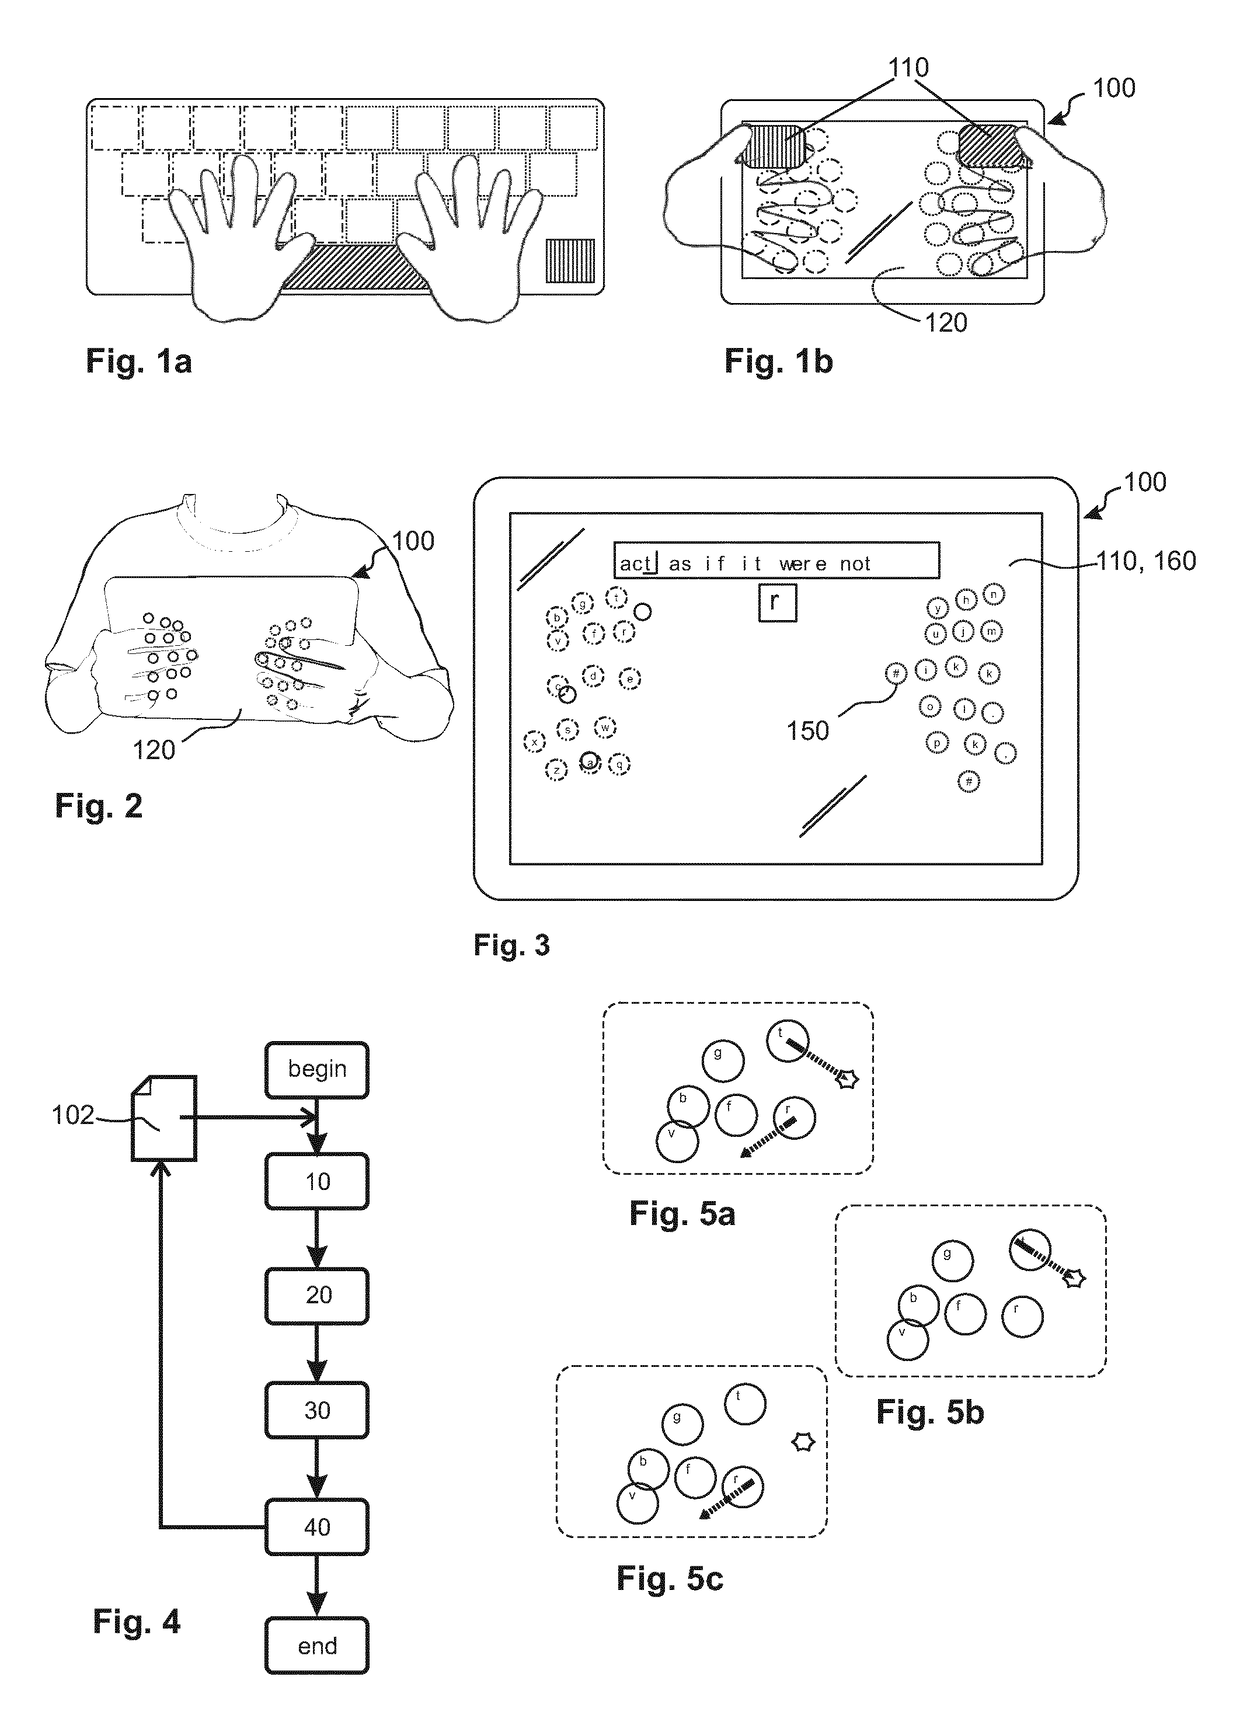 Method and device for typing on mobile computing devices